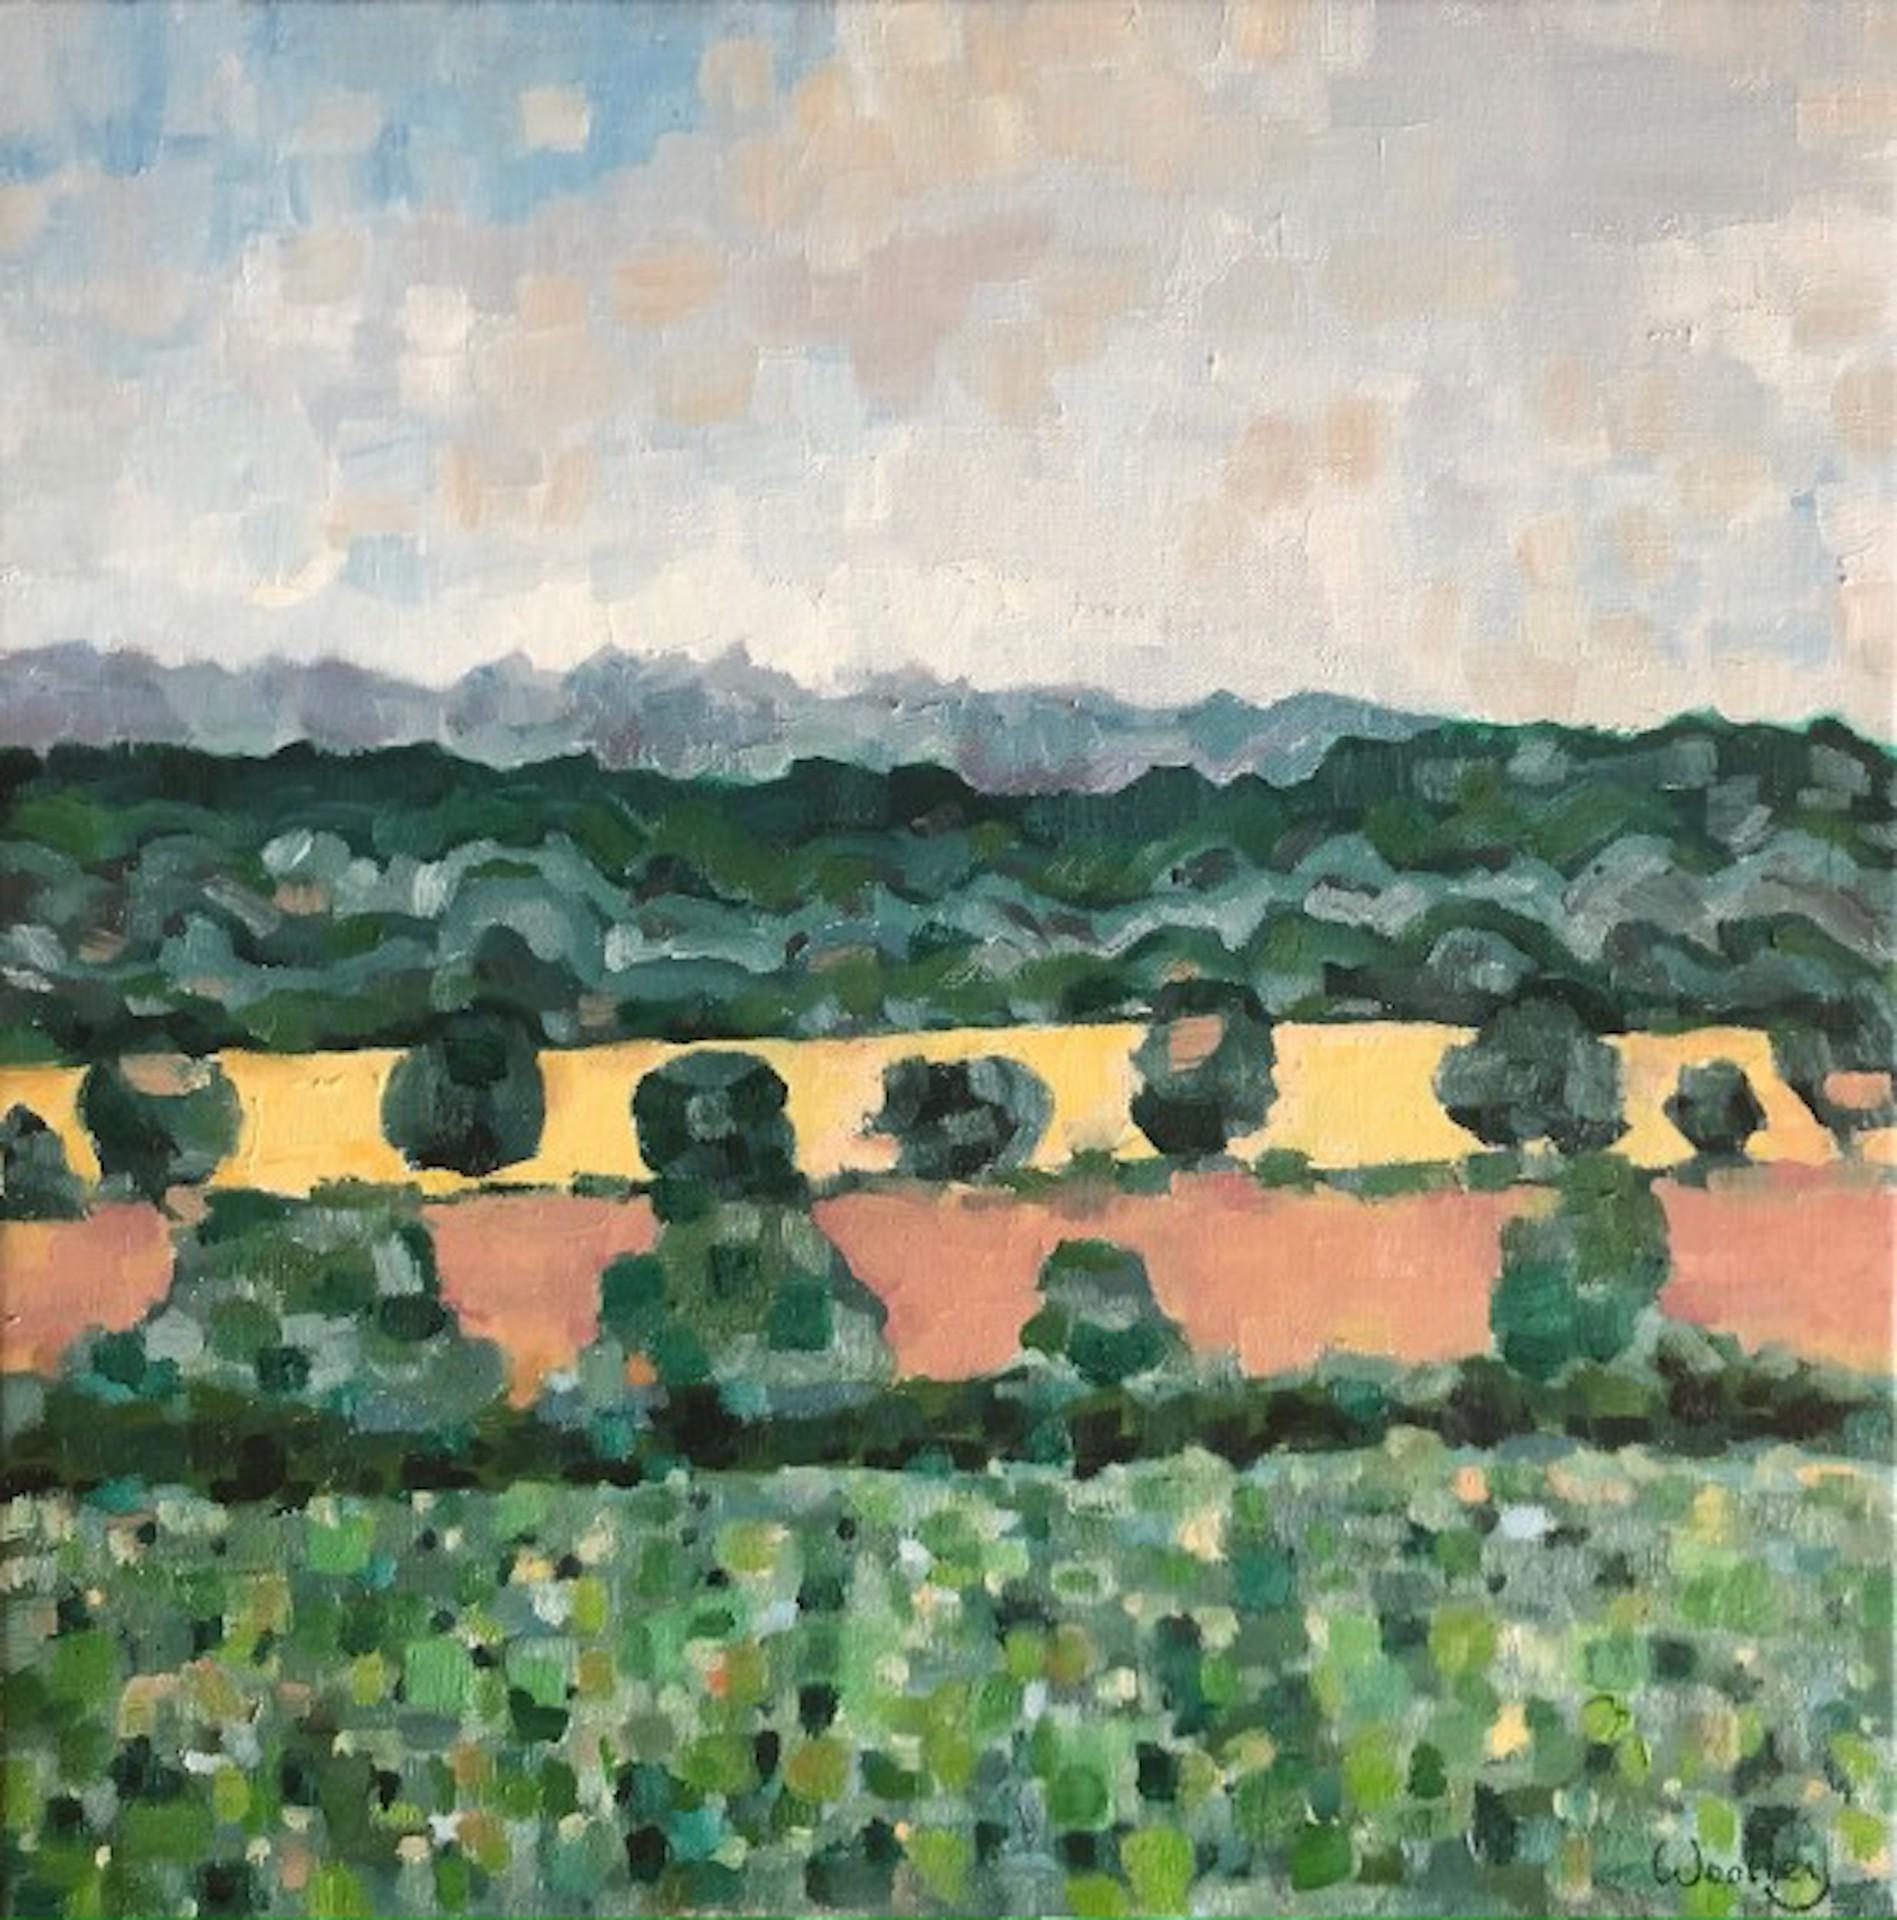 View from the Whispering Knights Rollright [September 2020]
Original
Landscape
Oil Paint on Canvas
Image size: H:50 cm x W:50 cm
Complete Size of Unframed Work: H:50 cm x W:50 cm x D:2cm
Sold Unframed
Please note that insitu images are purely an